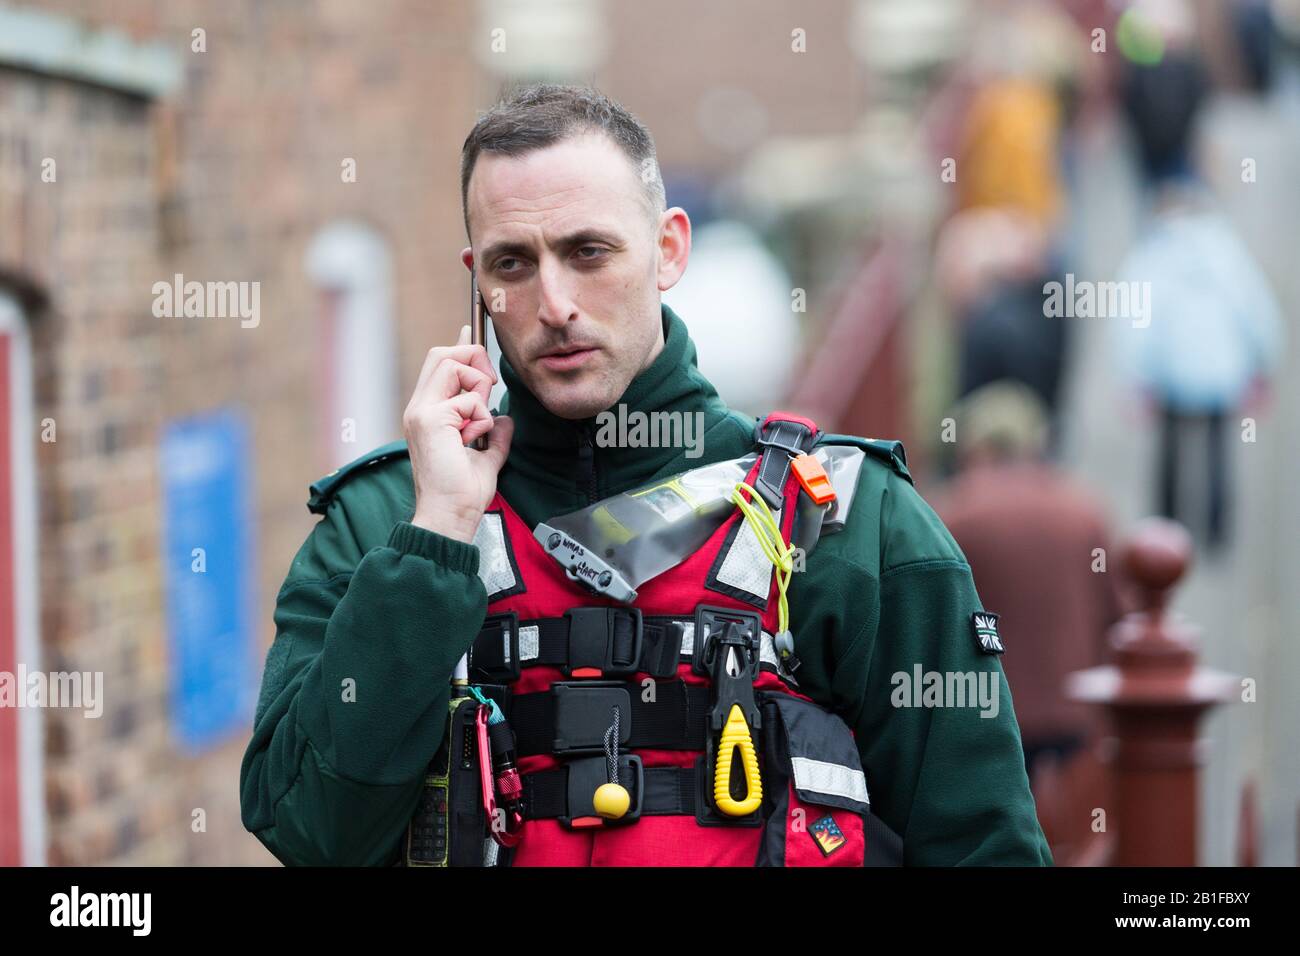 Ironbridge, Shropshire, UK. 25th Feb, 2020. Severe flood warning in place on the River Severn at Ironbridge, Shropshire. A rescue worker keeps up to date on the situation as the river levels continue to rise. Credit: Peter Lopeman/Alamy Live News Stock Photo